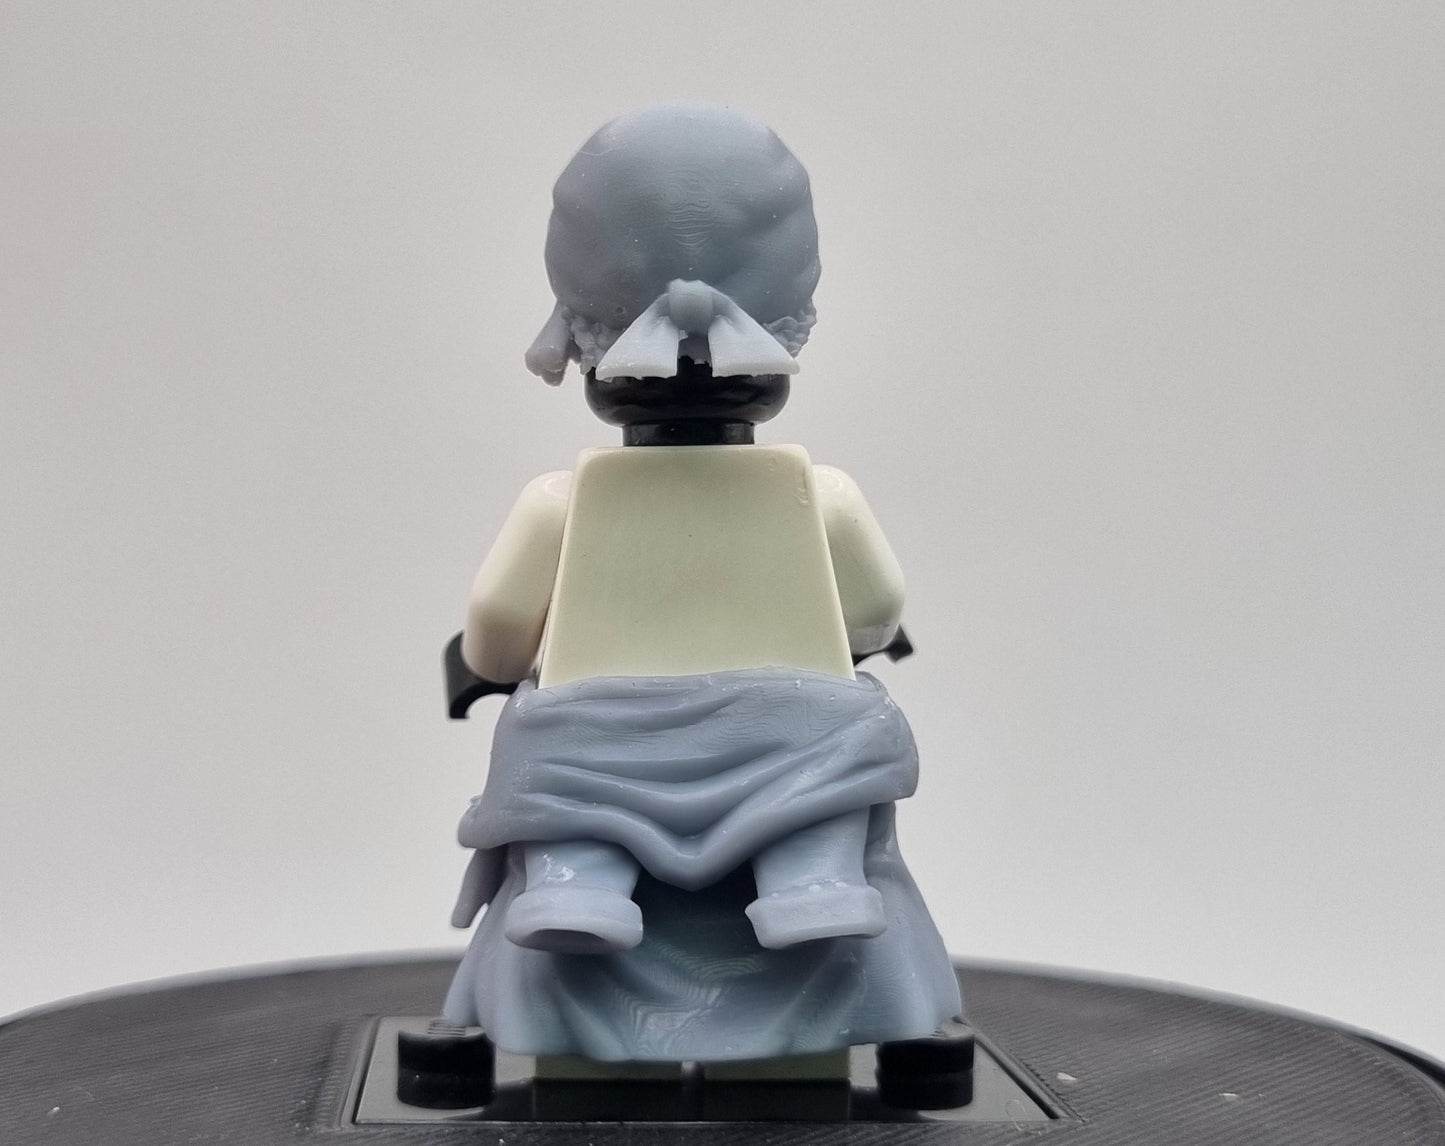 Building toy custom 3D printed 3 sword prirate hairpieces and cloak!